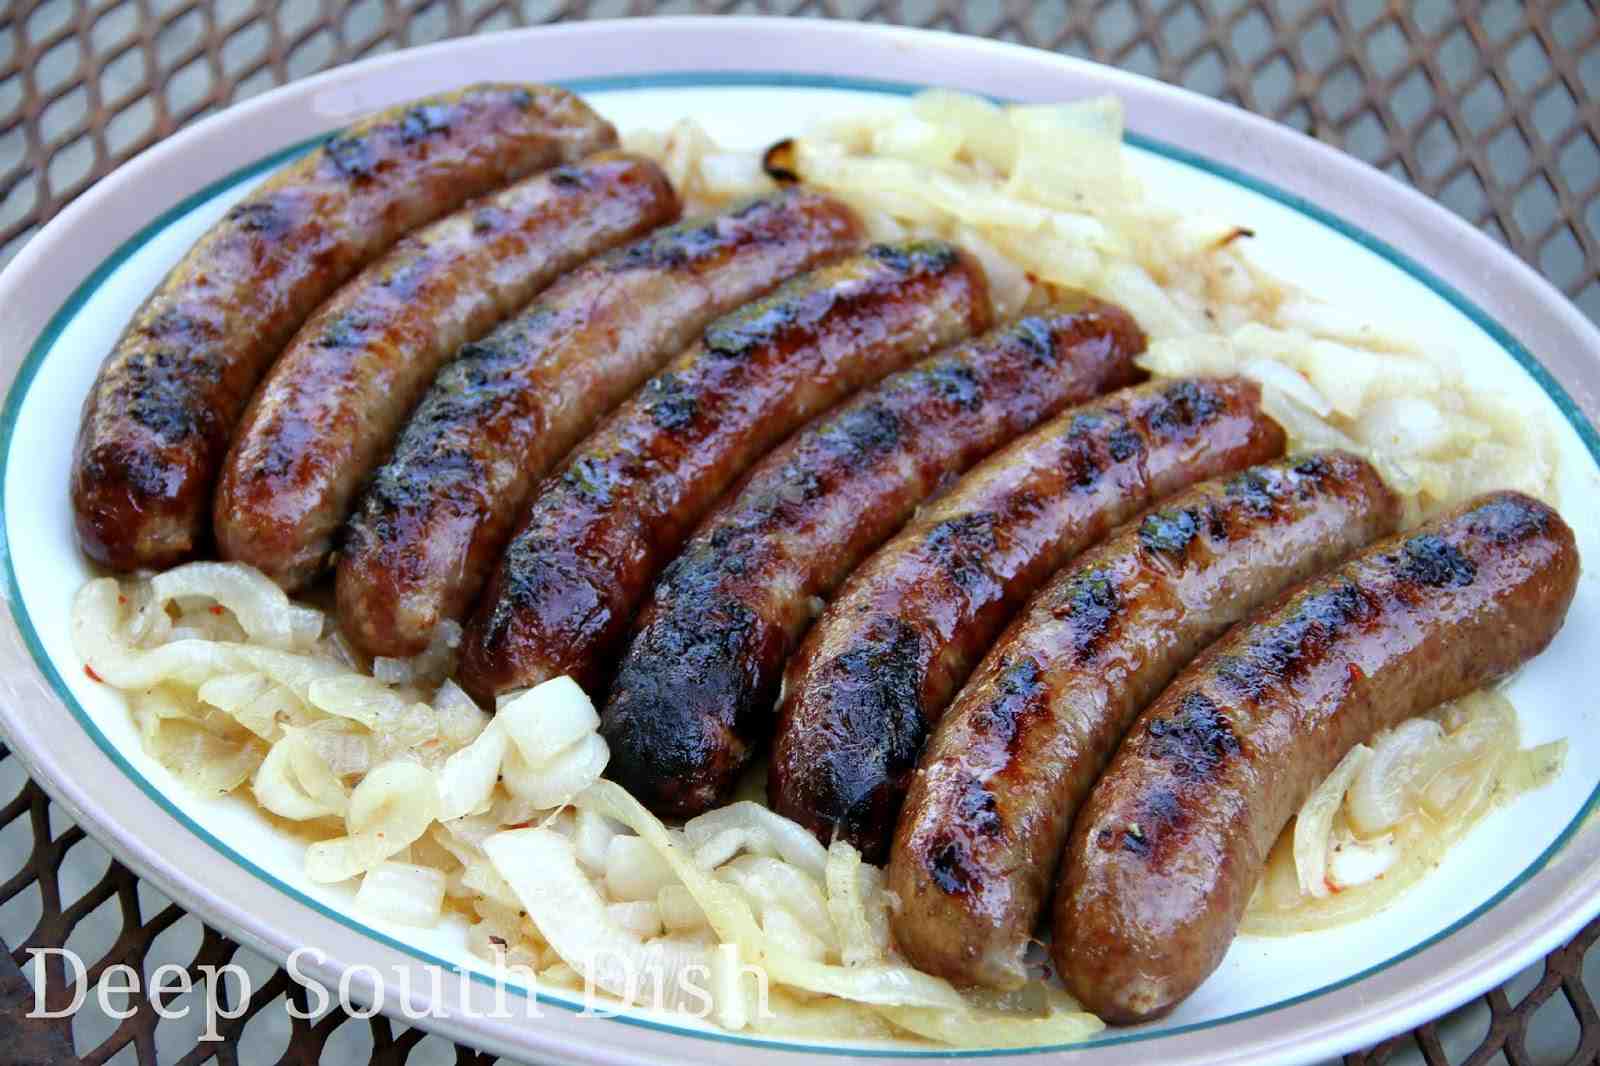 Are brats made with intestines?